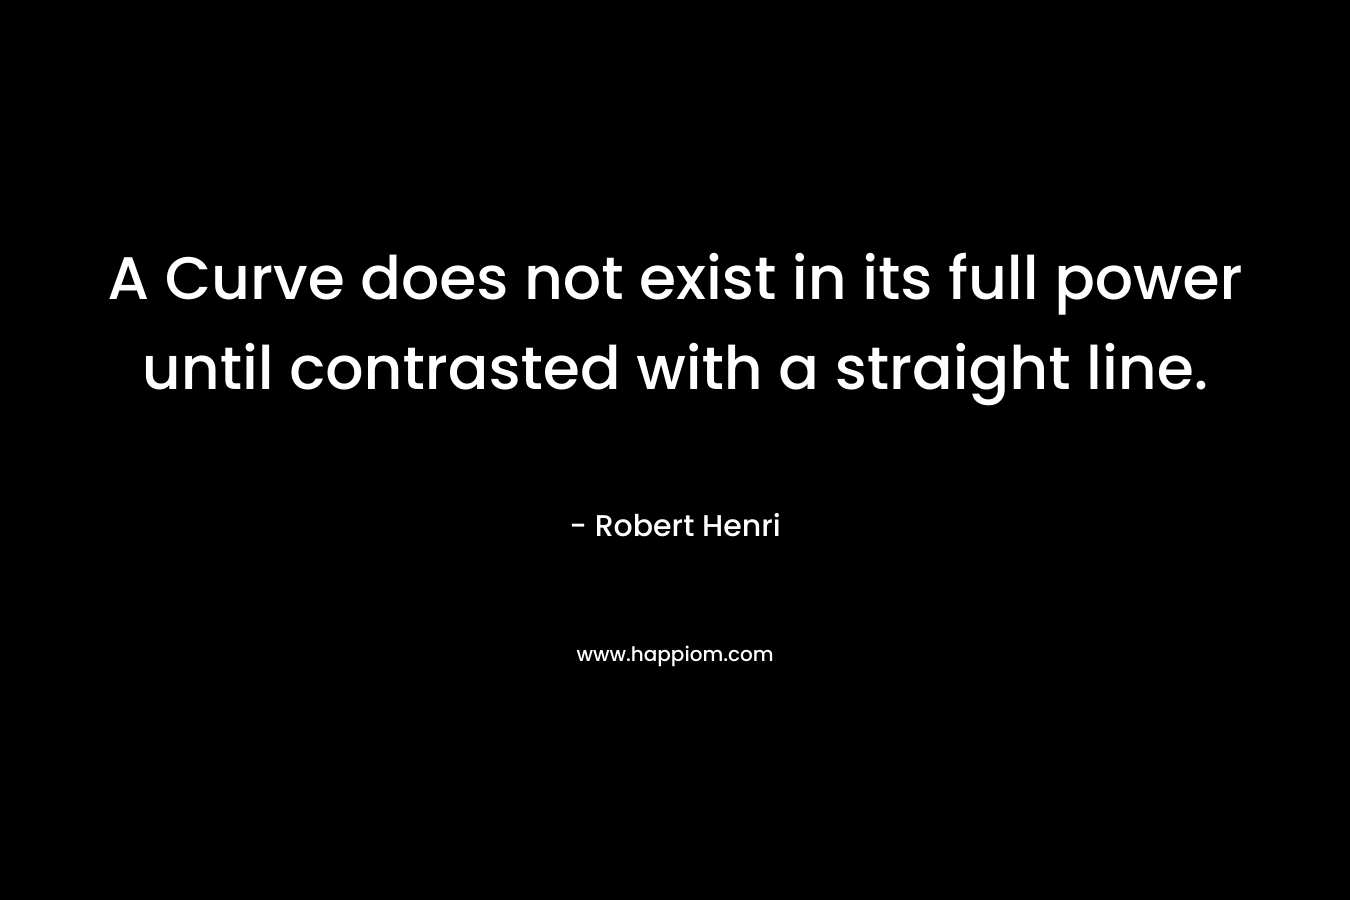 A Curve does not exist in its full power until contrasted with a straight line.